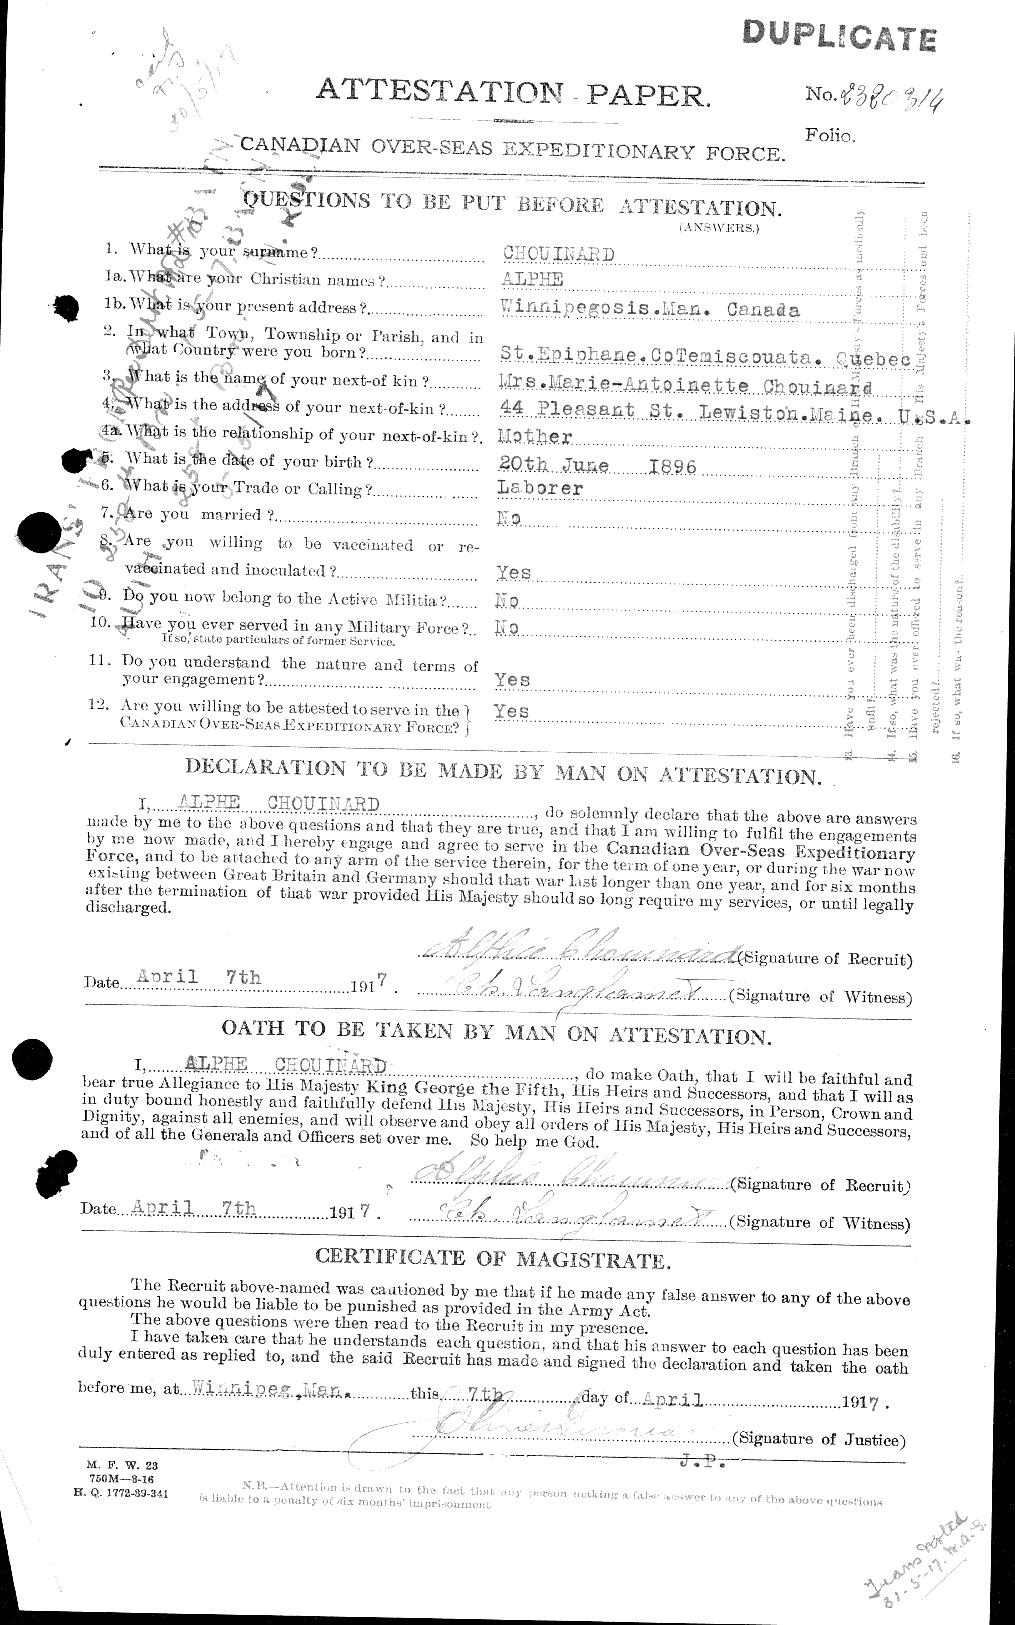 Personnel Records of the First World War - CEF 018581a